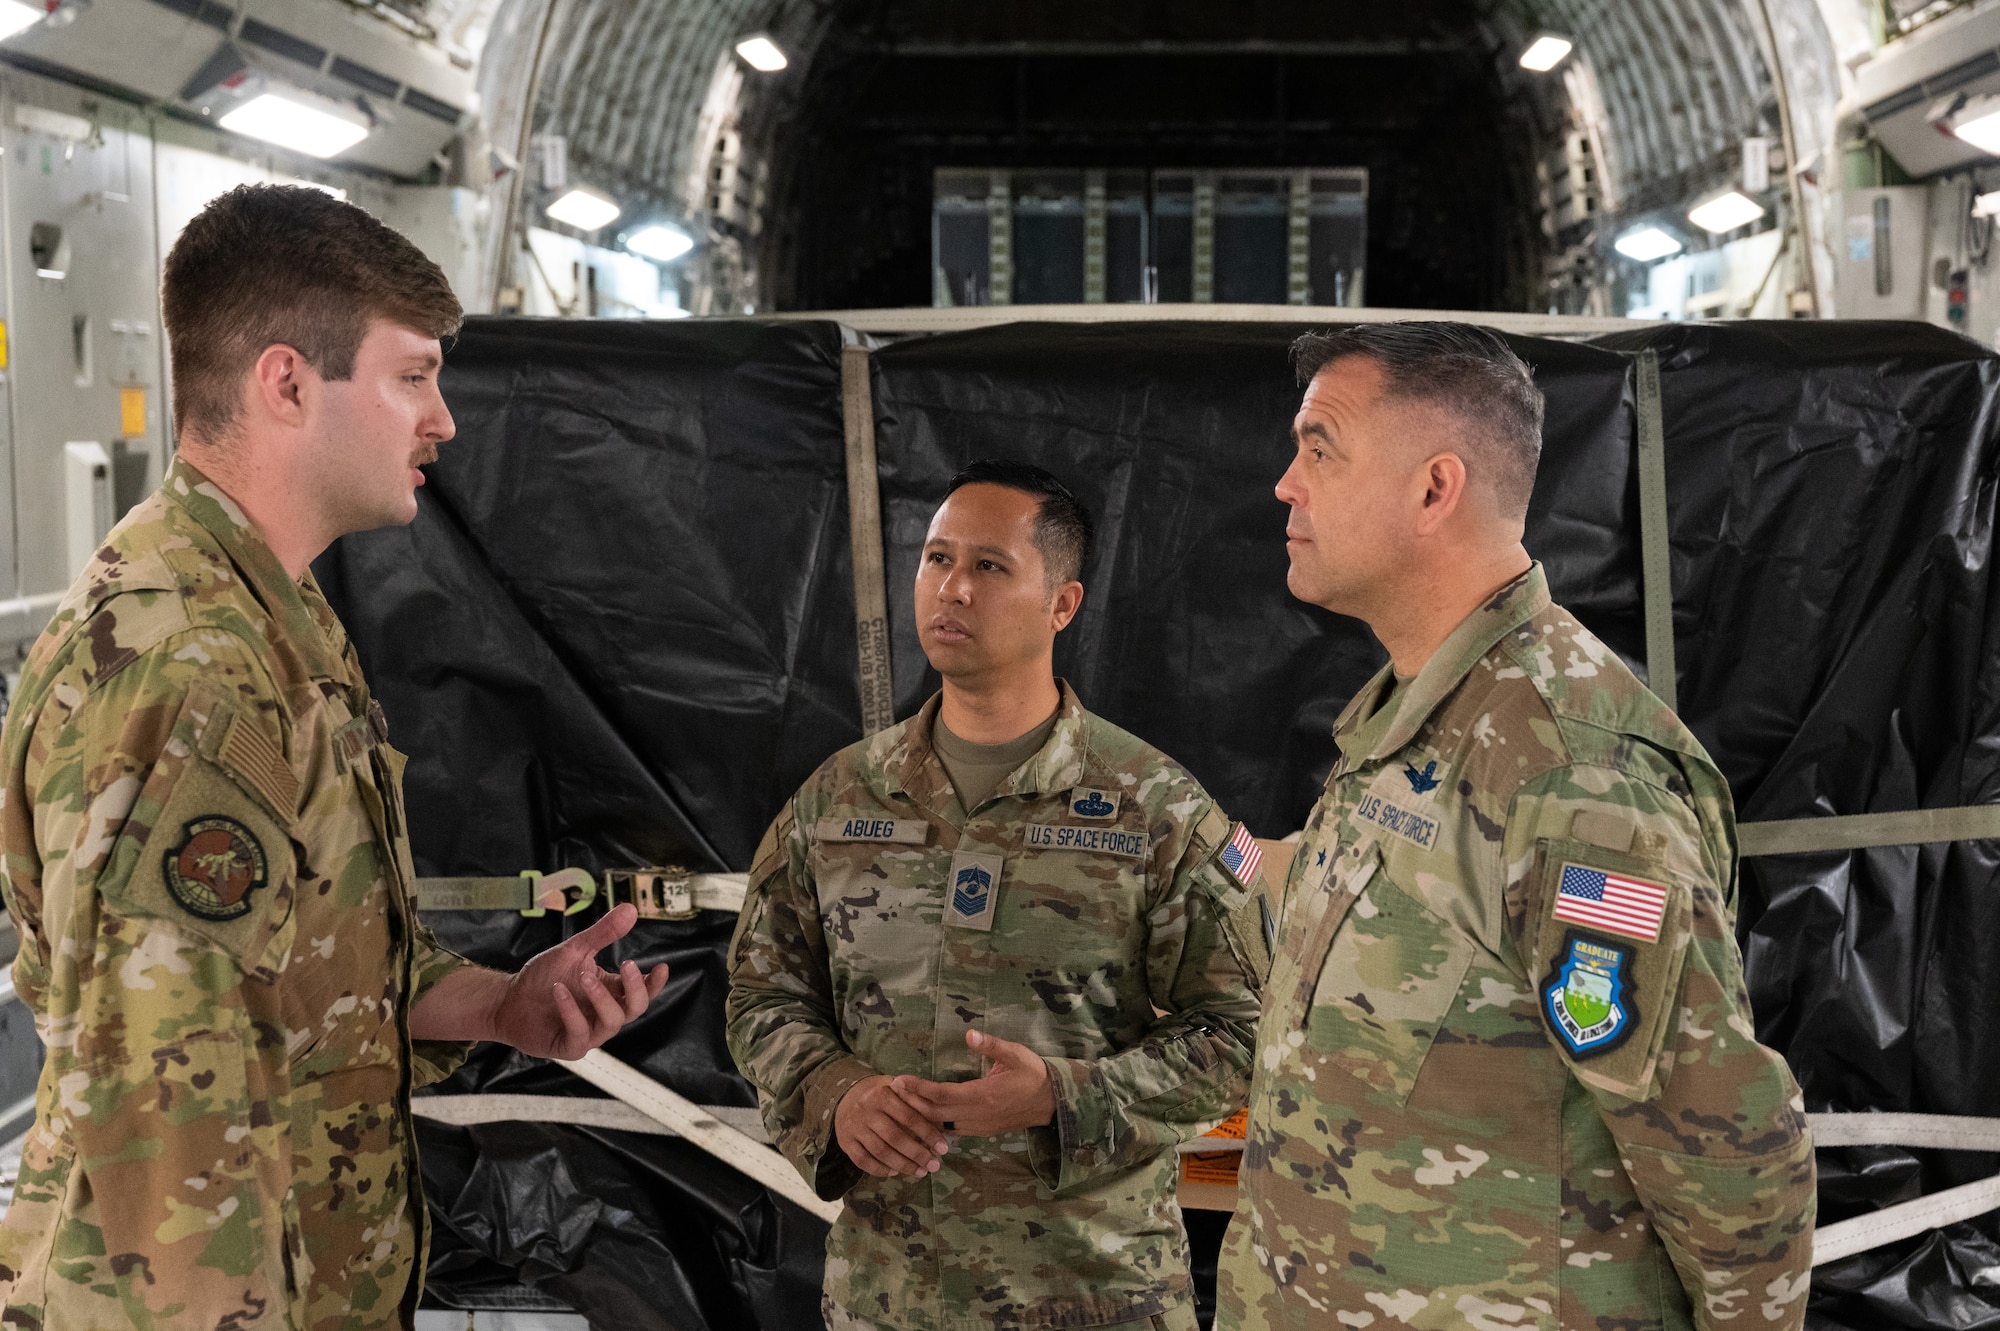 Staff Sgt. Kyle Wilson, 736th Aircraft Maintenance Squadron flying crew chief out of Dover Air Force Base, Delaware, speaks with Brig. Gen. Anthony Mastalir, U.S. Space Force-Indo-Pacific commander, and Chief Master Sgt. Leomel I. Abueg, U.S. Space Force-Indo-Pacific Component-Field Command Senior Enlisted Leader, Joint Base Pearl Harbor-Hickam, Hawaii, May 9, 2023. The U.S. Space Force announced the delivery the second of two Space Domain Awareness sensors to Japan that will be hosted on Japanese satellites to build SDA capacity and resiliency, in support of a US-Japan cooperative effort called Quasi-Zenith Satellite System Hosted Payload. (U.S. Air Force photo by Tech. Sgt. Hailey Haux)